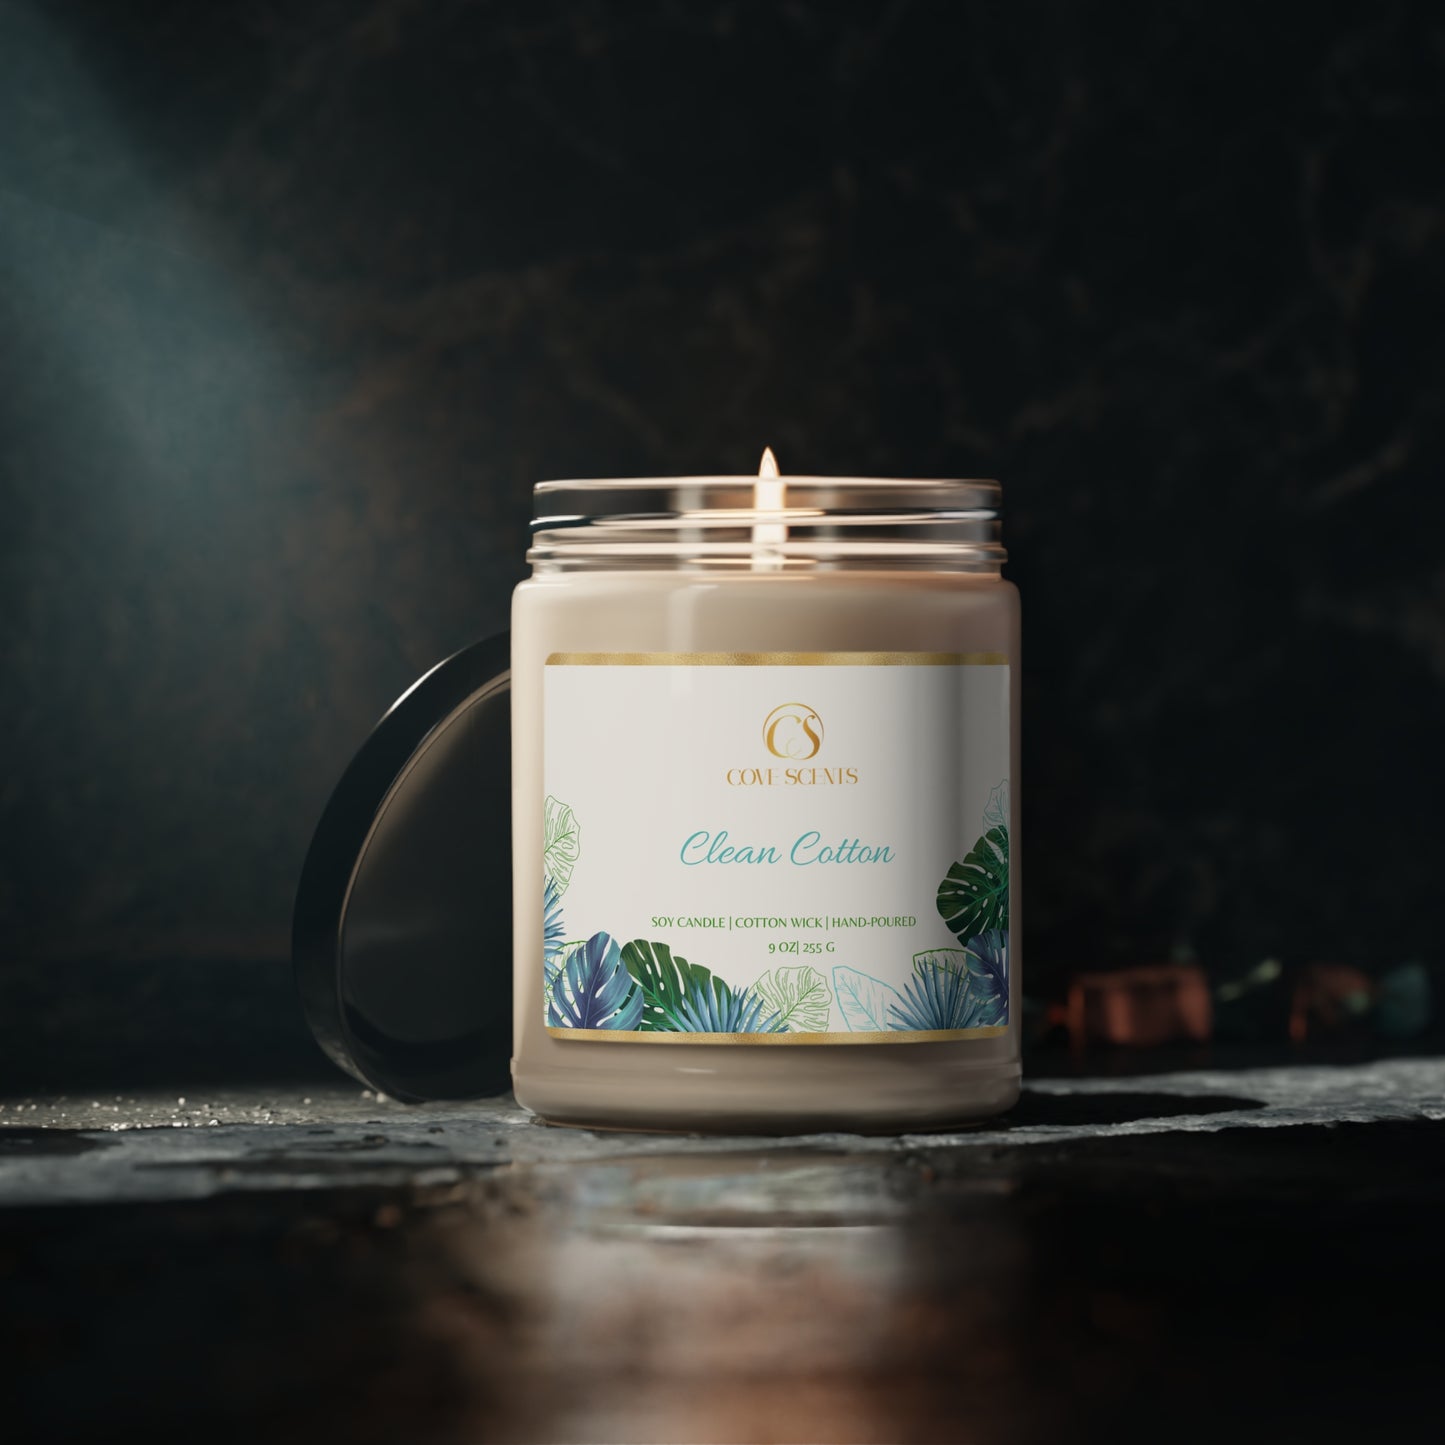 Clean Cotton Soy Candle